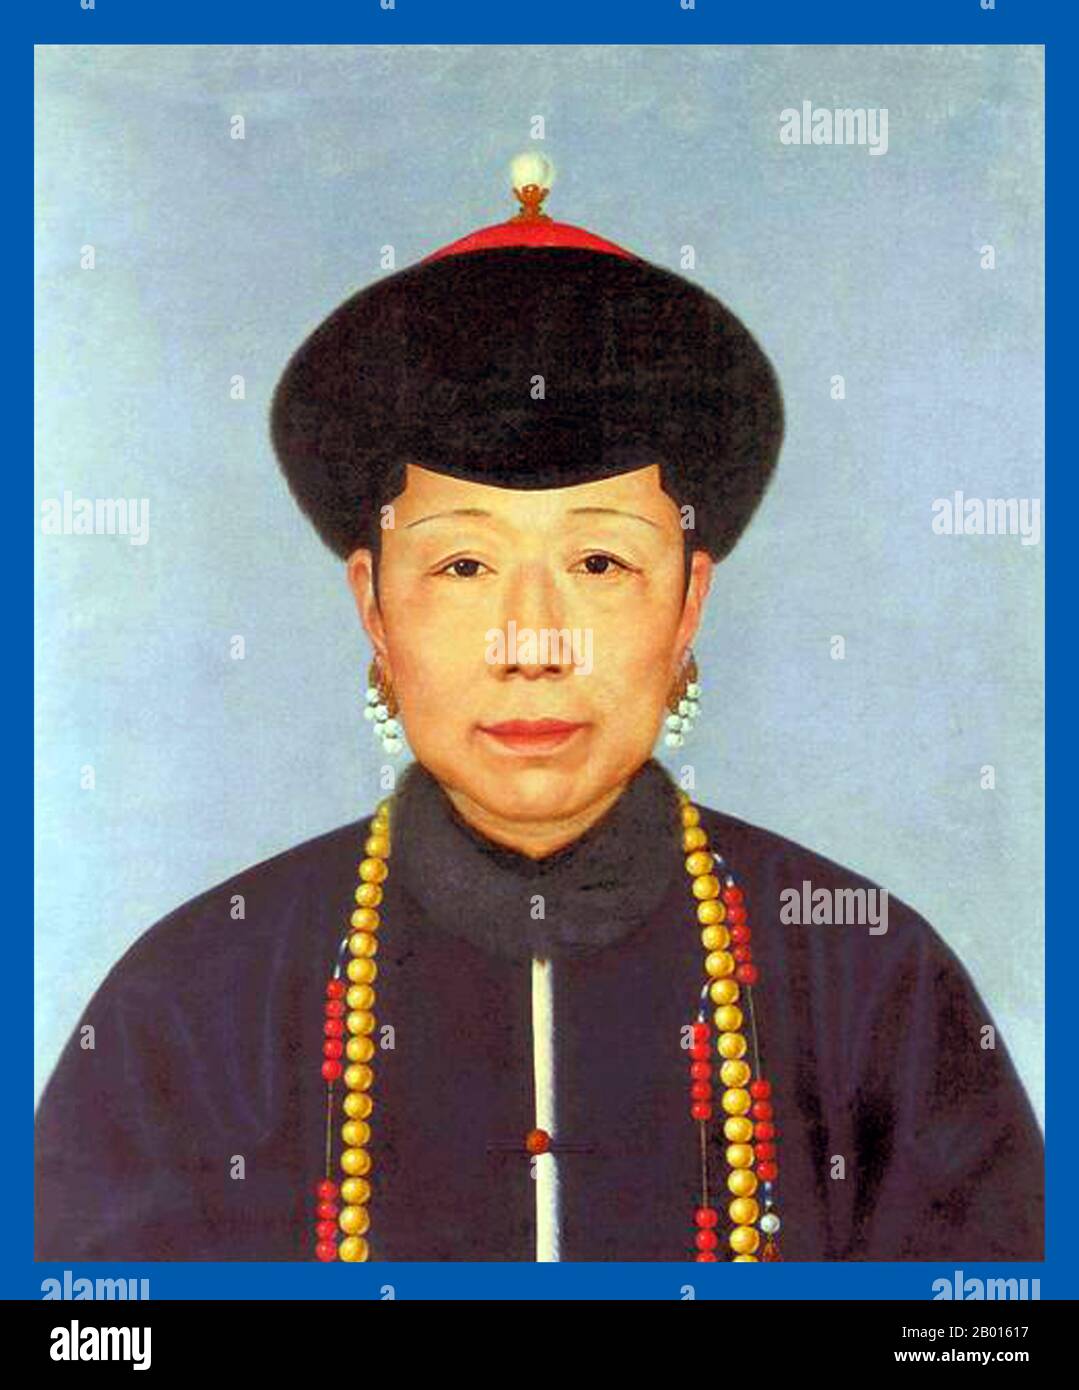 China: Empress Xiao Sheng Xian (12 January 1692 - 2 March 1777) consort of the Yongzheng Emperor. Hanging scroll painting, 18th century.  Empress Xiaoshengxian was the consort of Emperor Yongzheng of the Qing Dynasty, and mother to Hongli, the Qianlong Emperor. She hailed from the Niohuru Clan of the Bordered Yellow Banner, and so was known as Lady Niohuru. She was granted the title of Consort Xi in 1723, and then Noble Consort Xi in 1730. When her son became emperor, she was honoured as 'Empress Dowager Chongqing', and became a trusted advisor to the Qianlong Emperor. Stock Photo